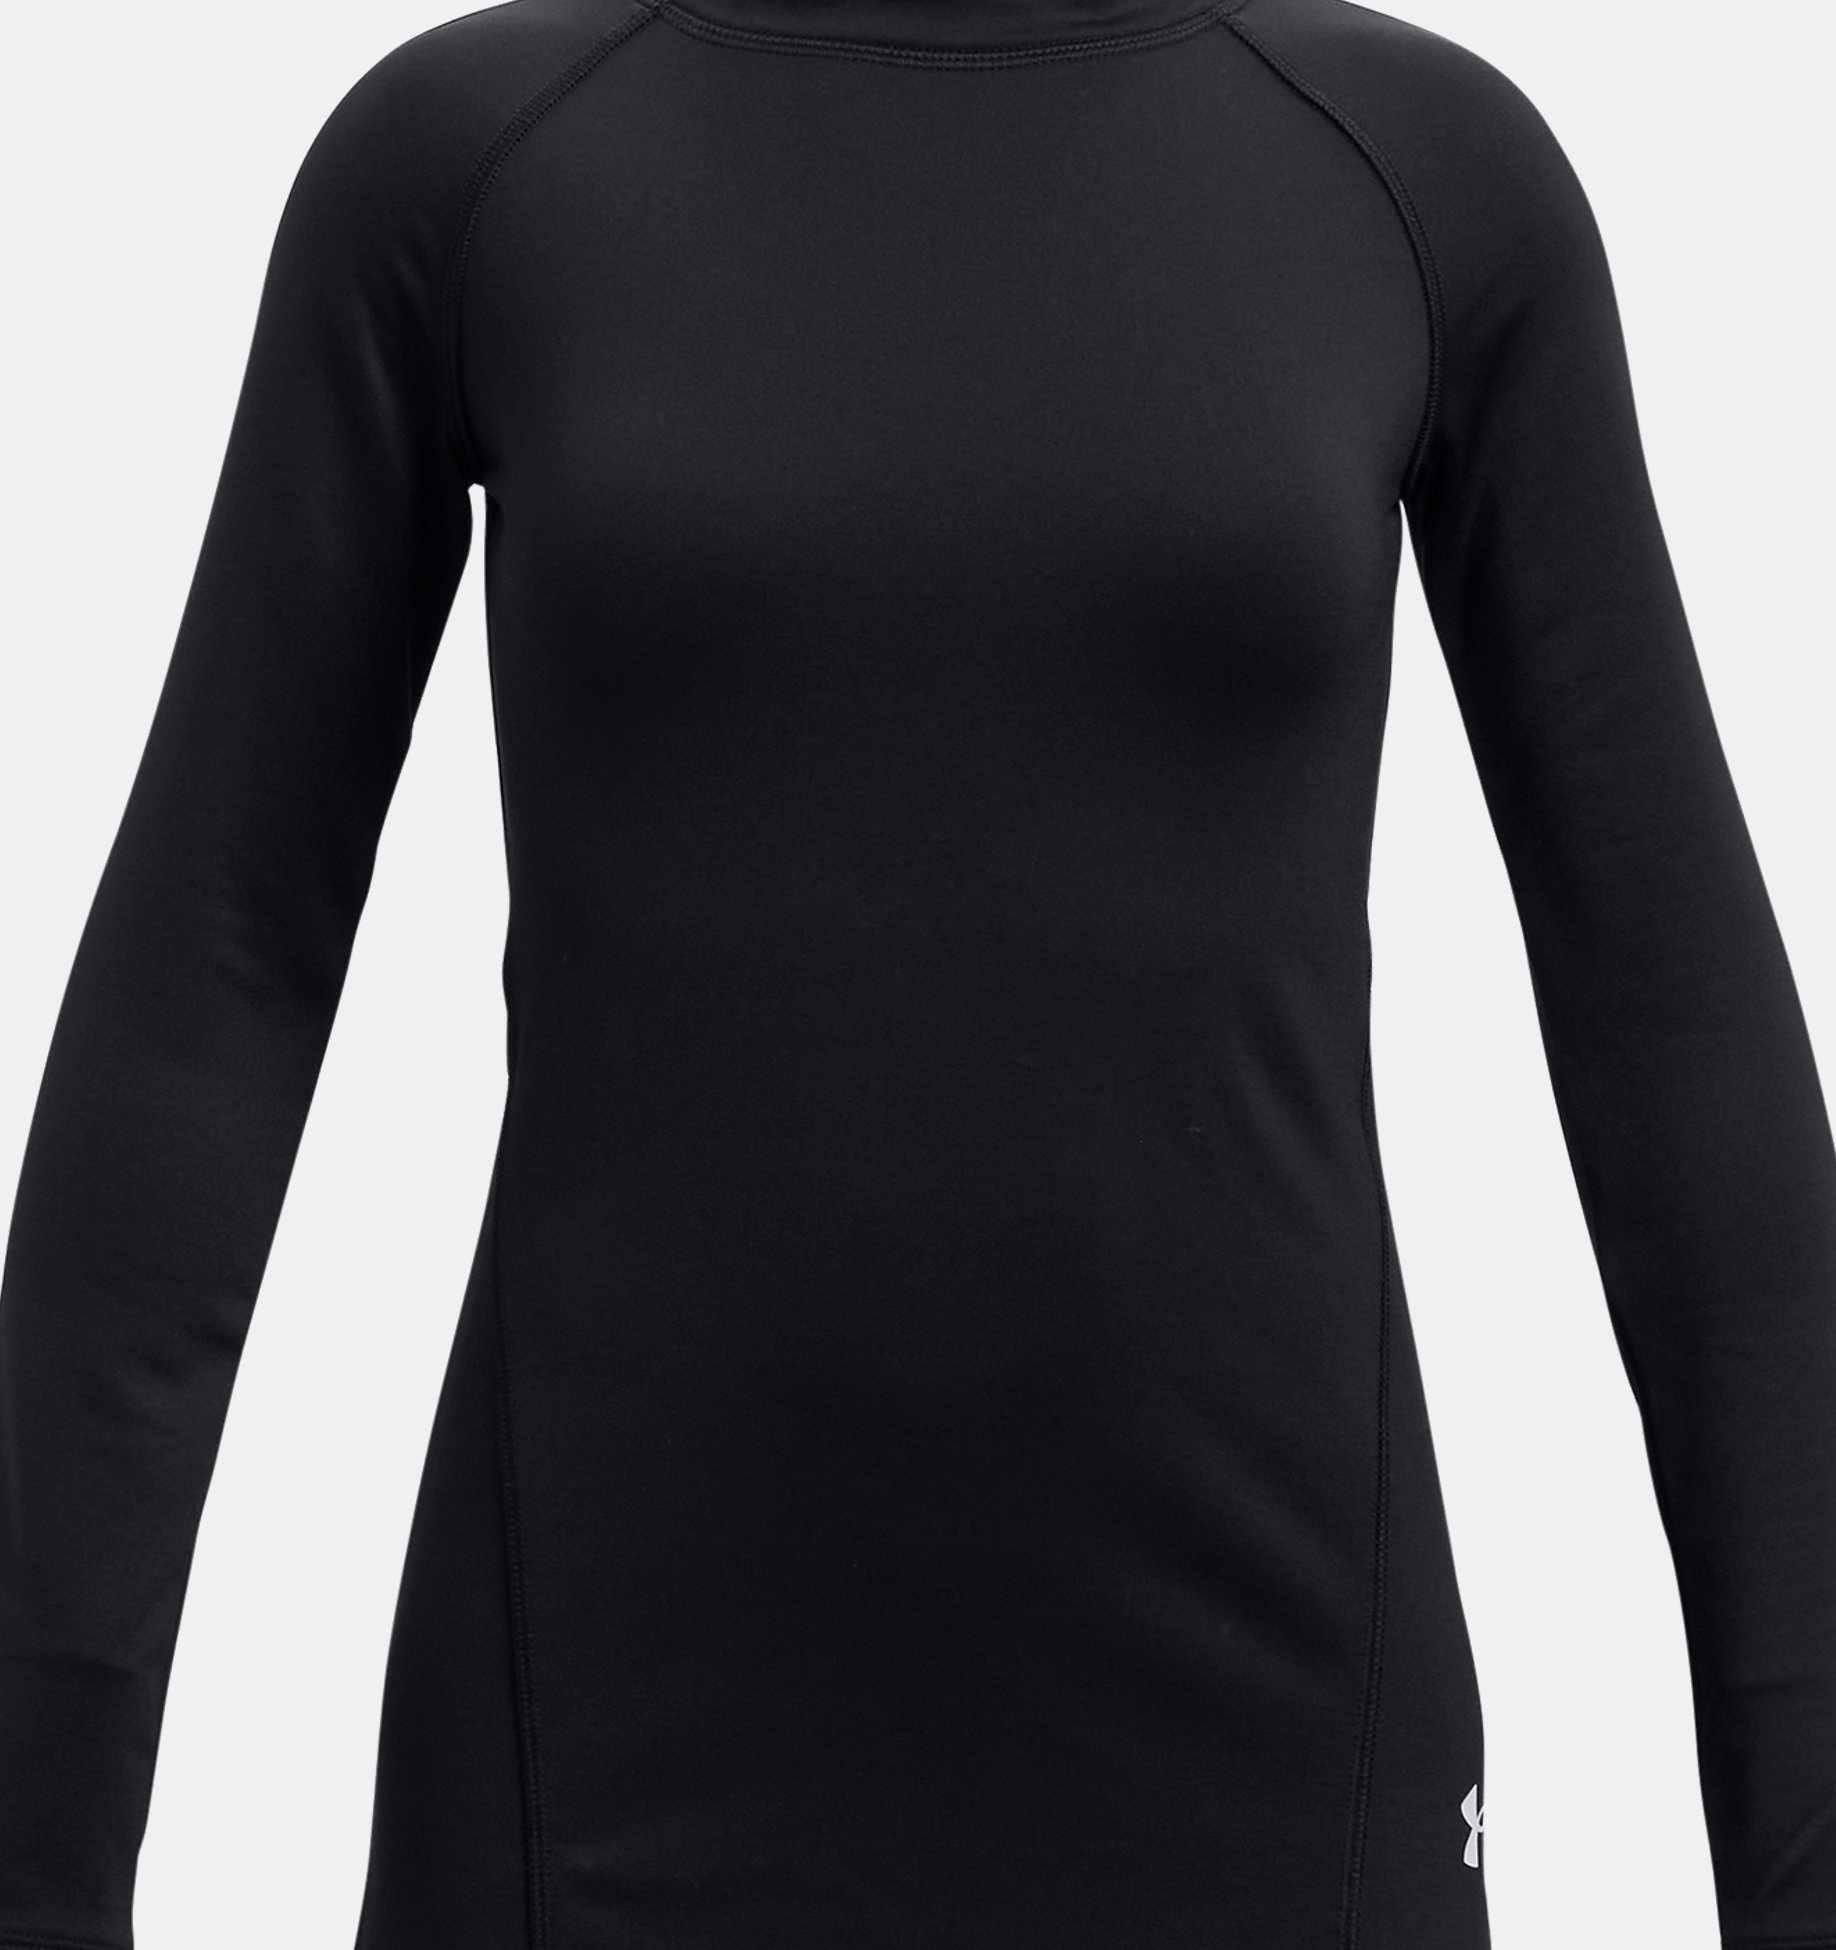 Under Armour Girls Youth ColdGear Long Sleeve Mock Black White XS